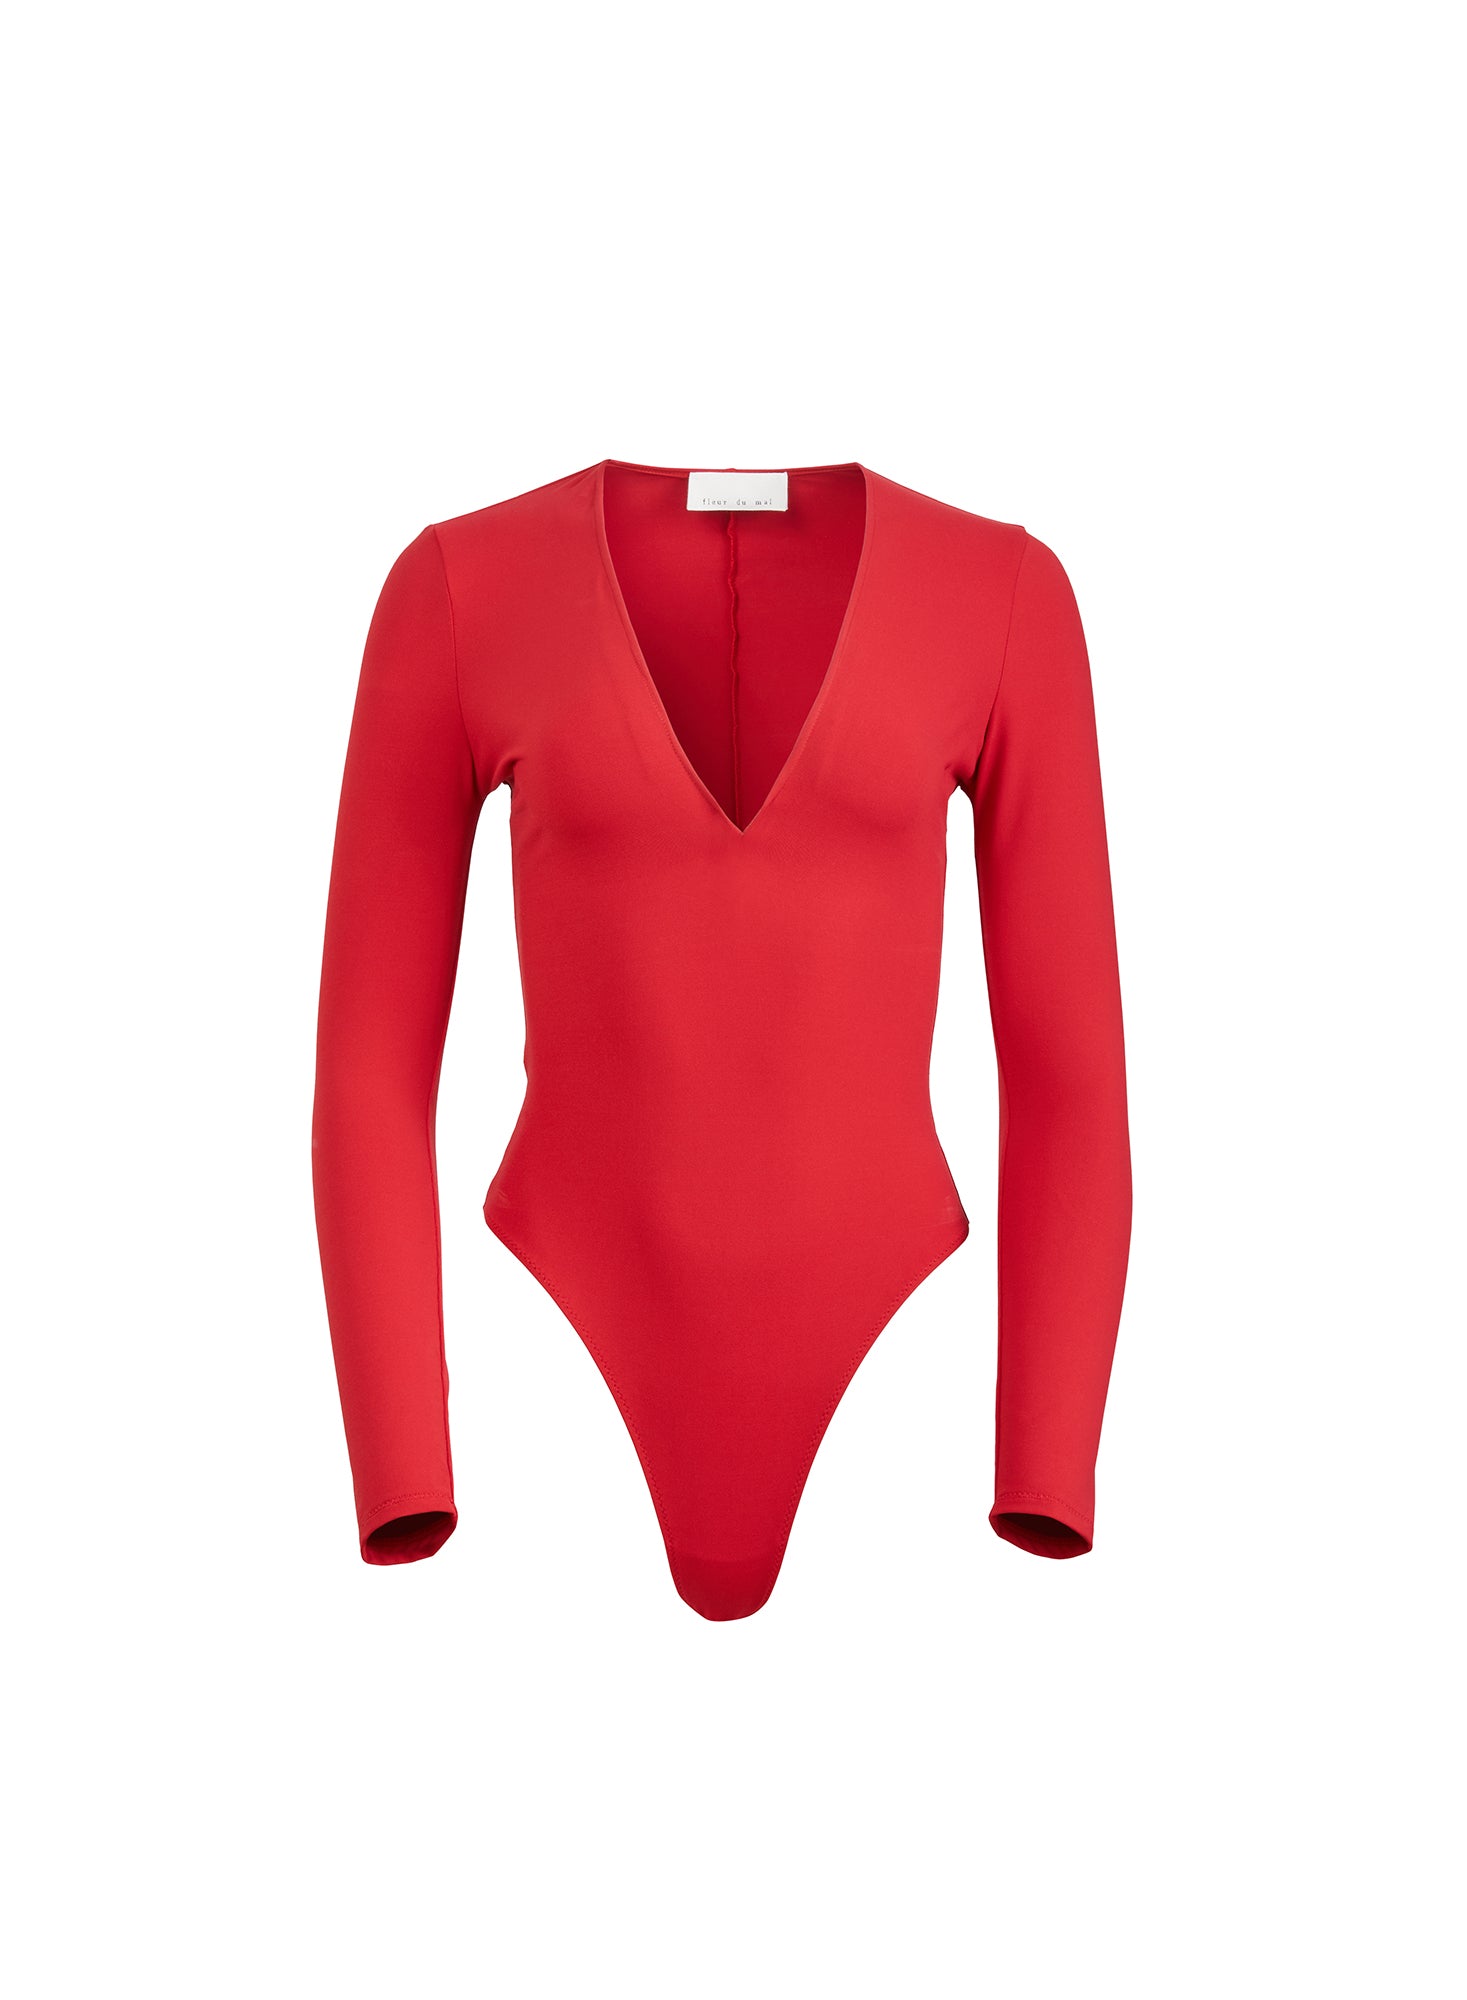 Women Express red, long sleeve body suit. Size large. Prev